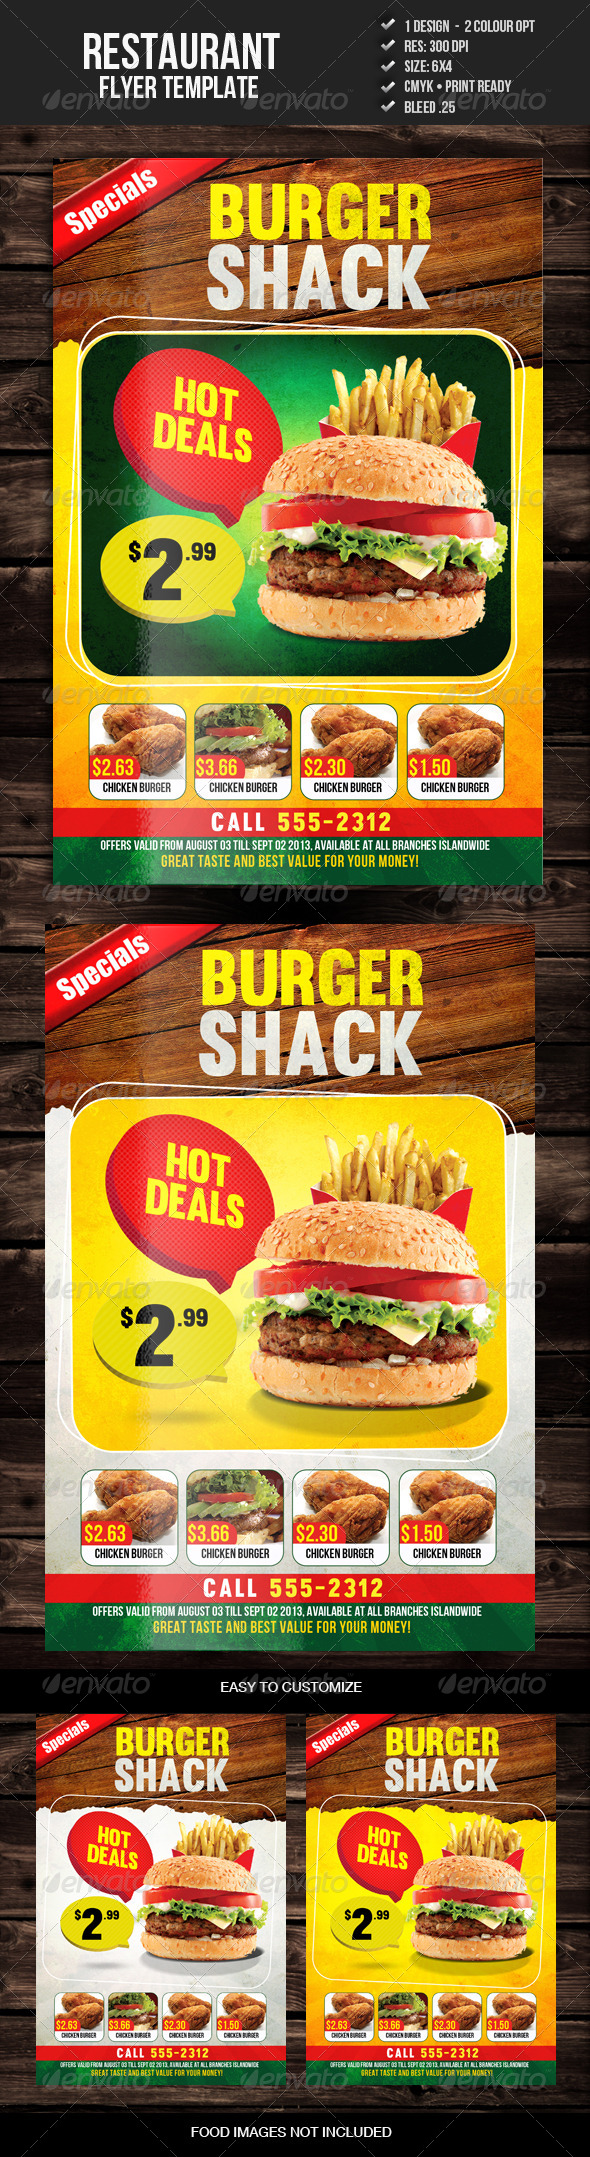 Food Promo Flyer Template 4